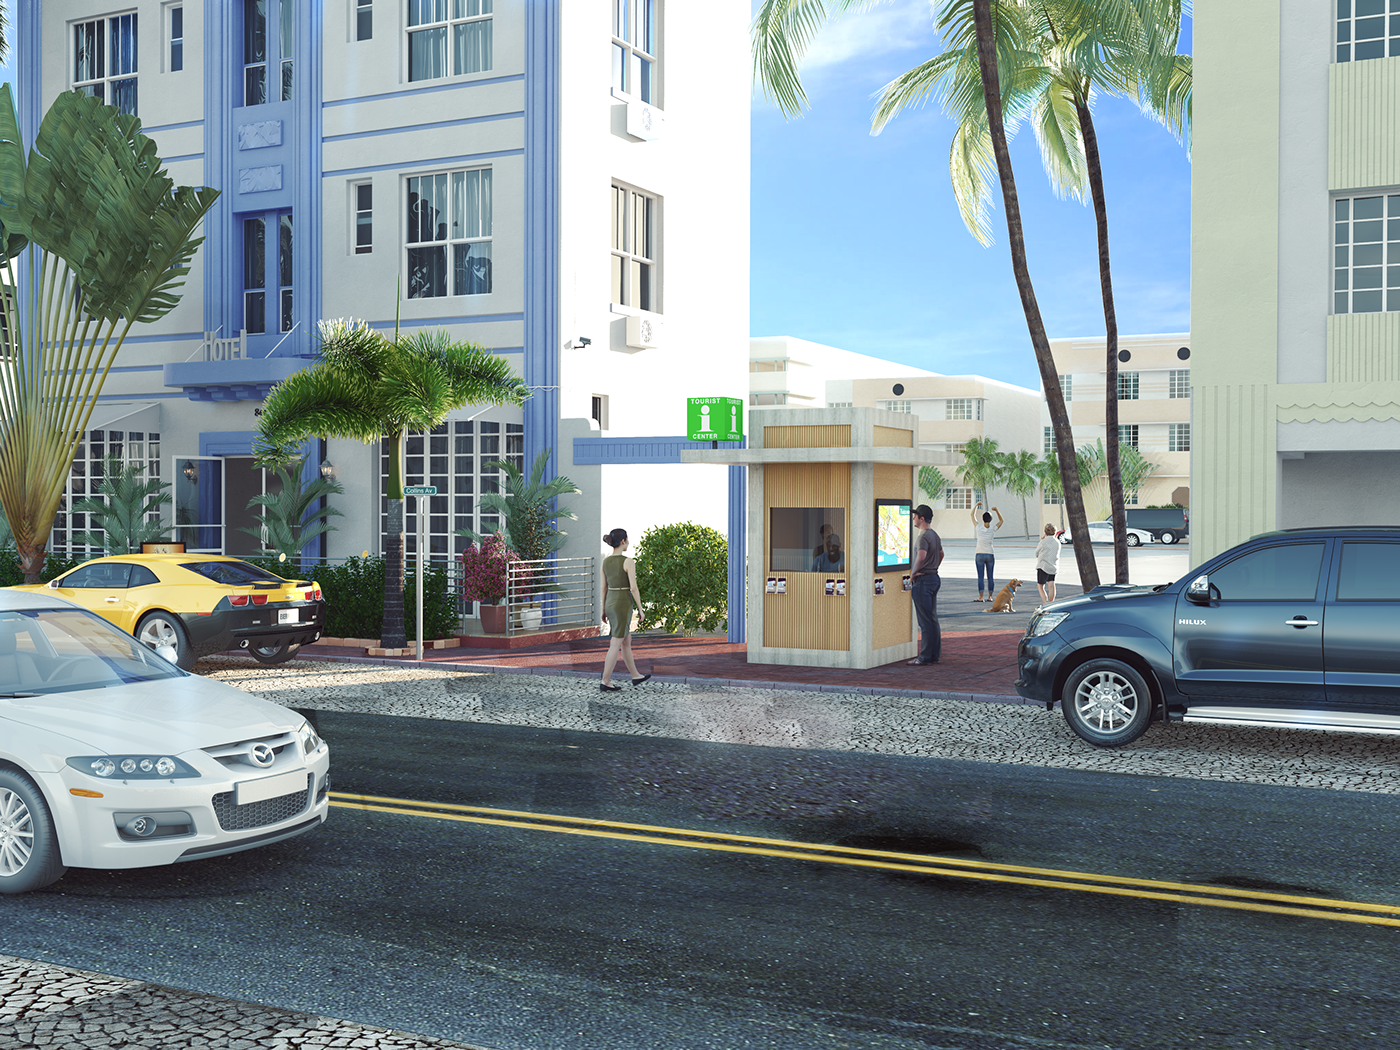 3ds max vray Render modeling visualization photoshop tourist Barbados info realistic